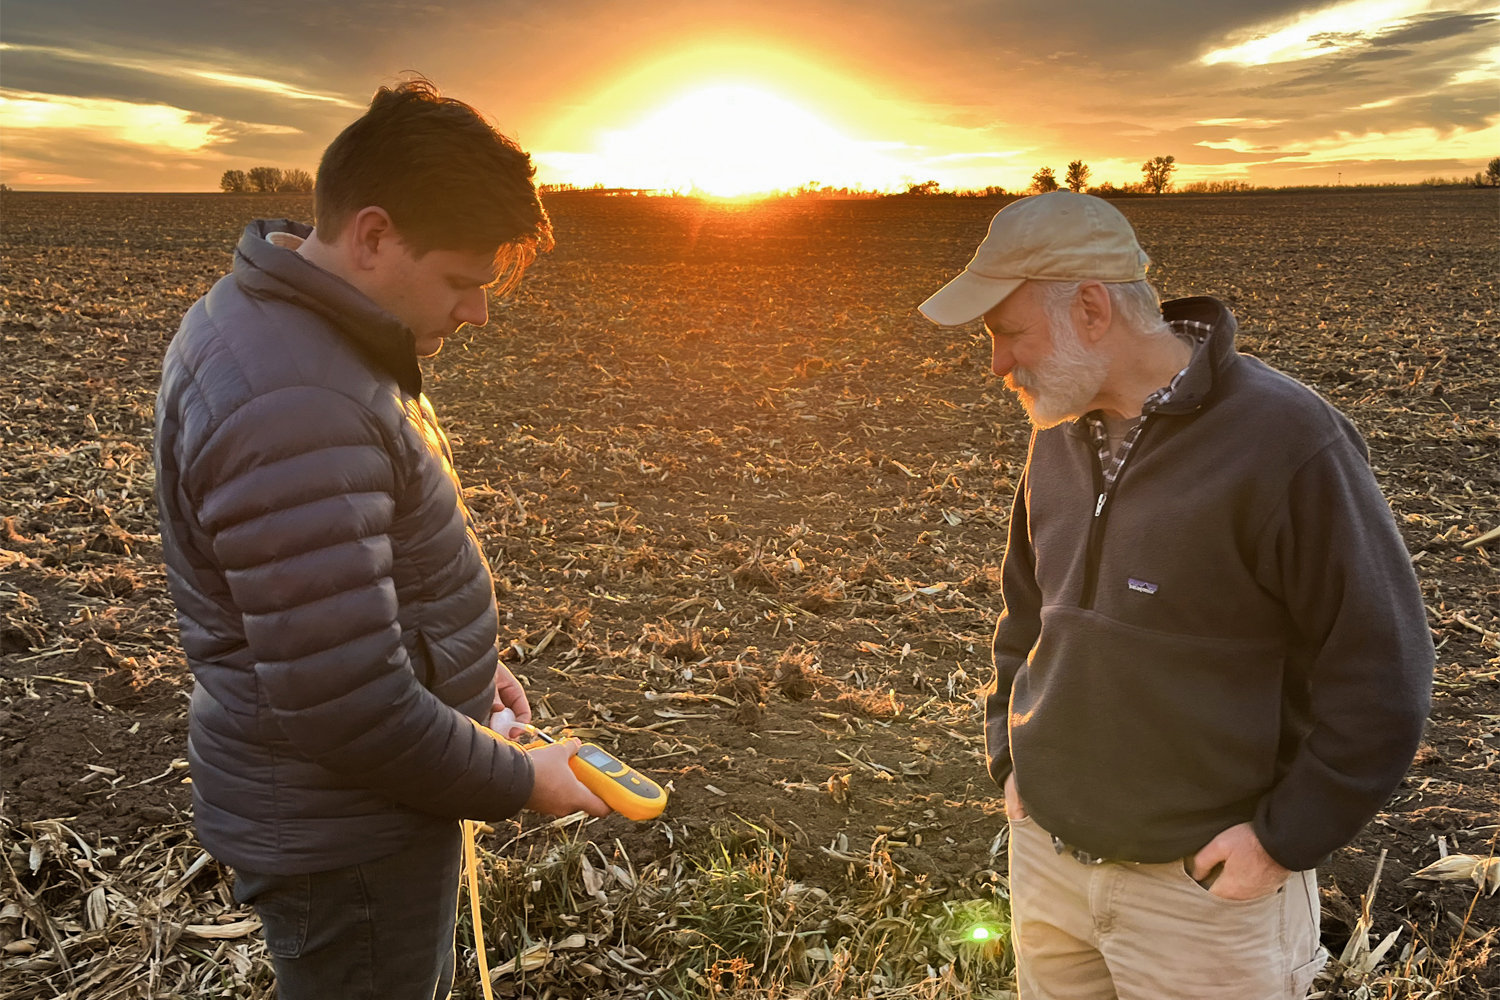 Two men stand in a field, looking at a gas gauge. The sun sets in the background